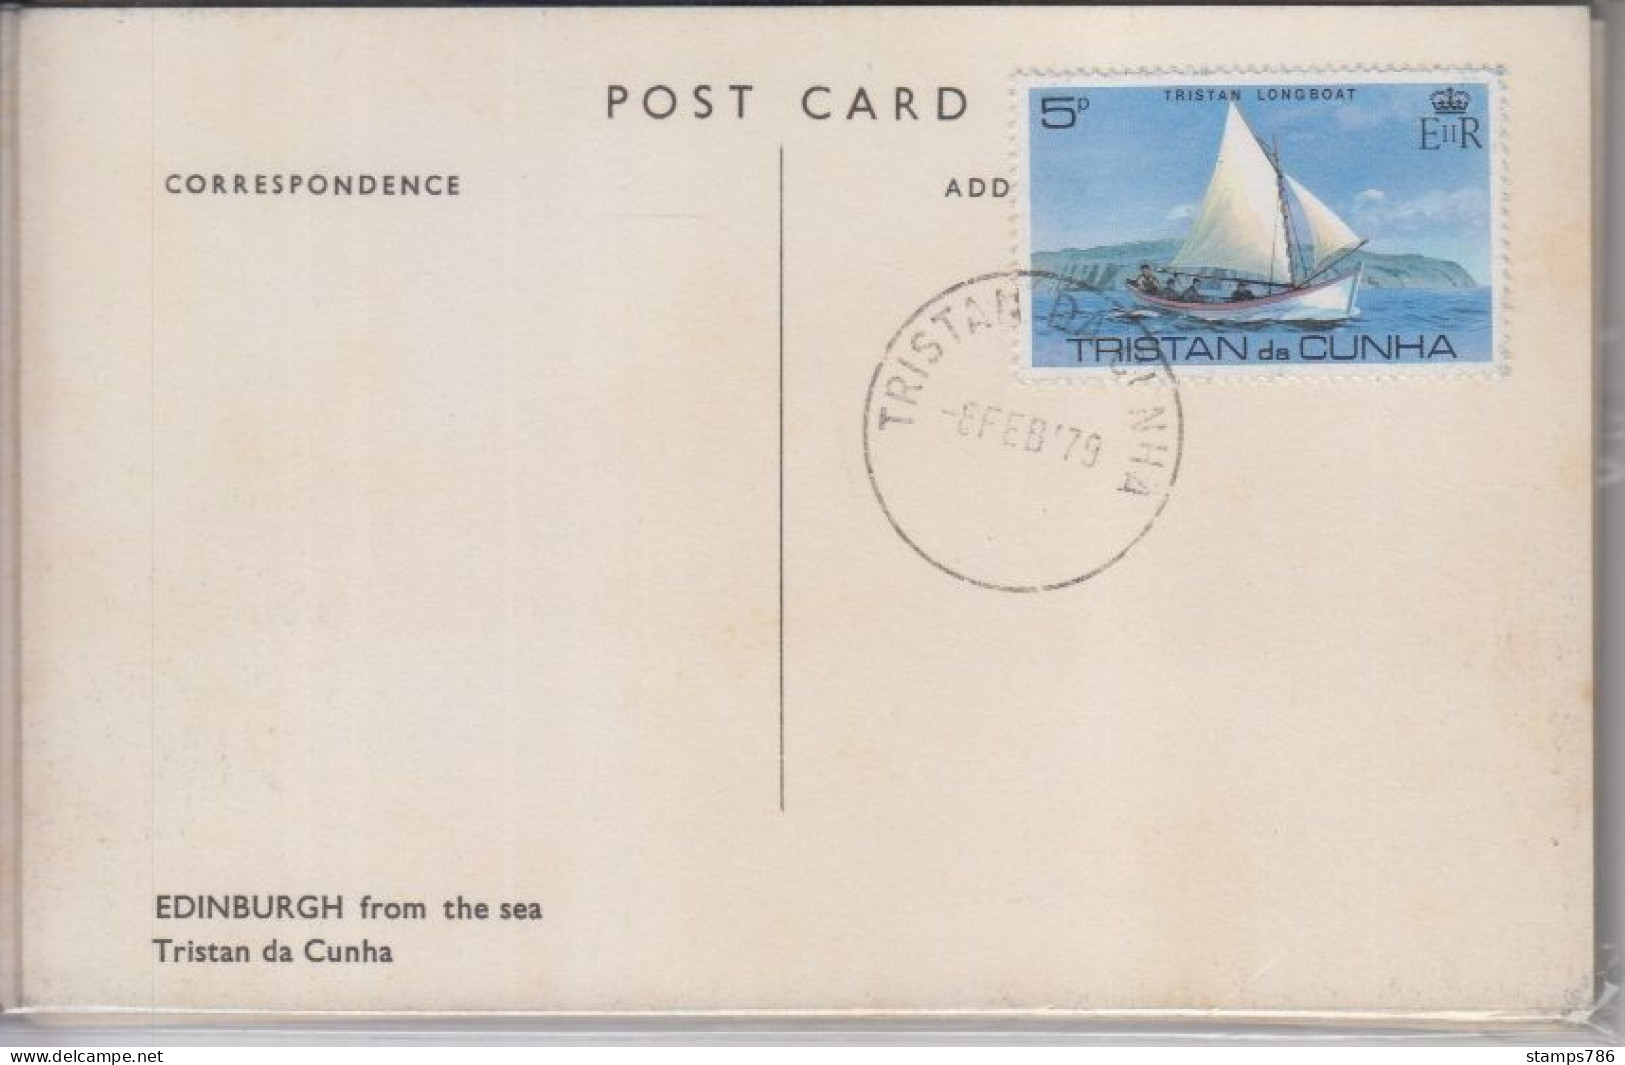 Norfolk Island 7 cover stamps (A-4000)